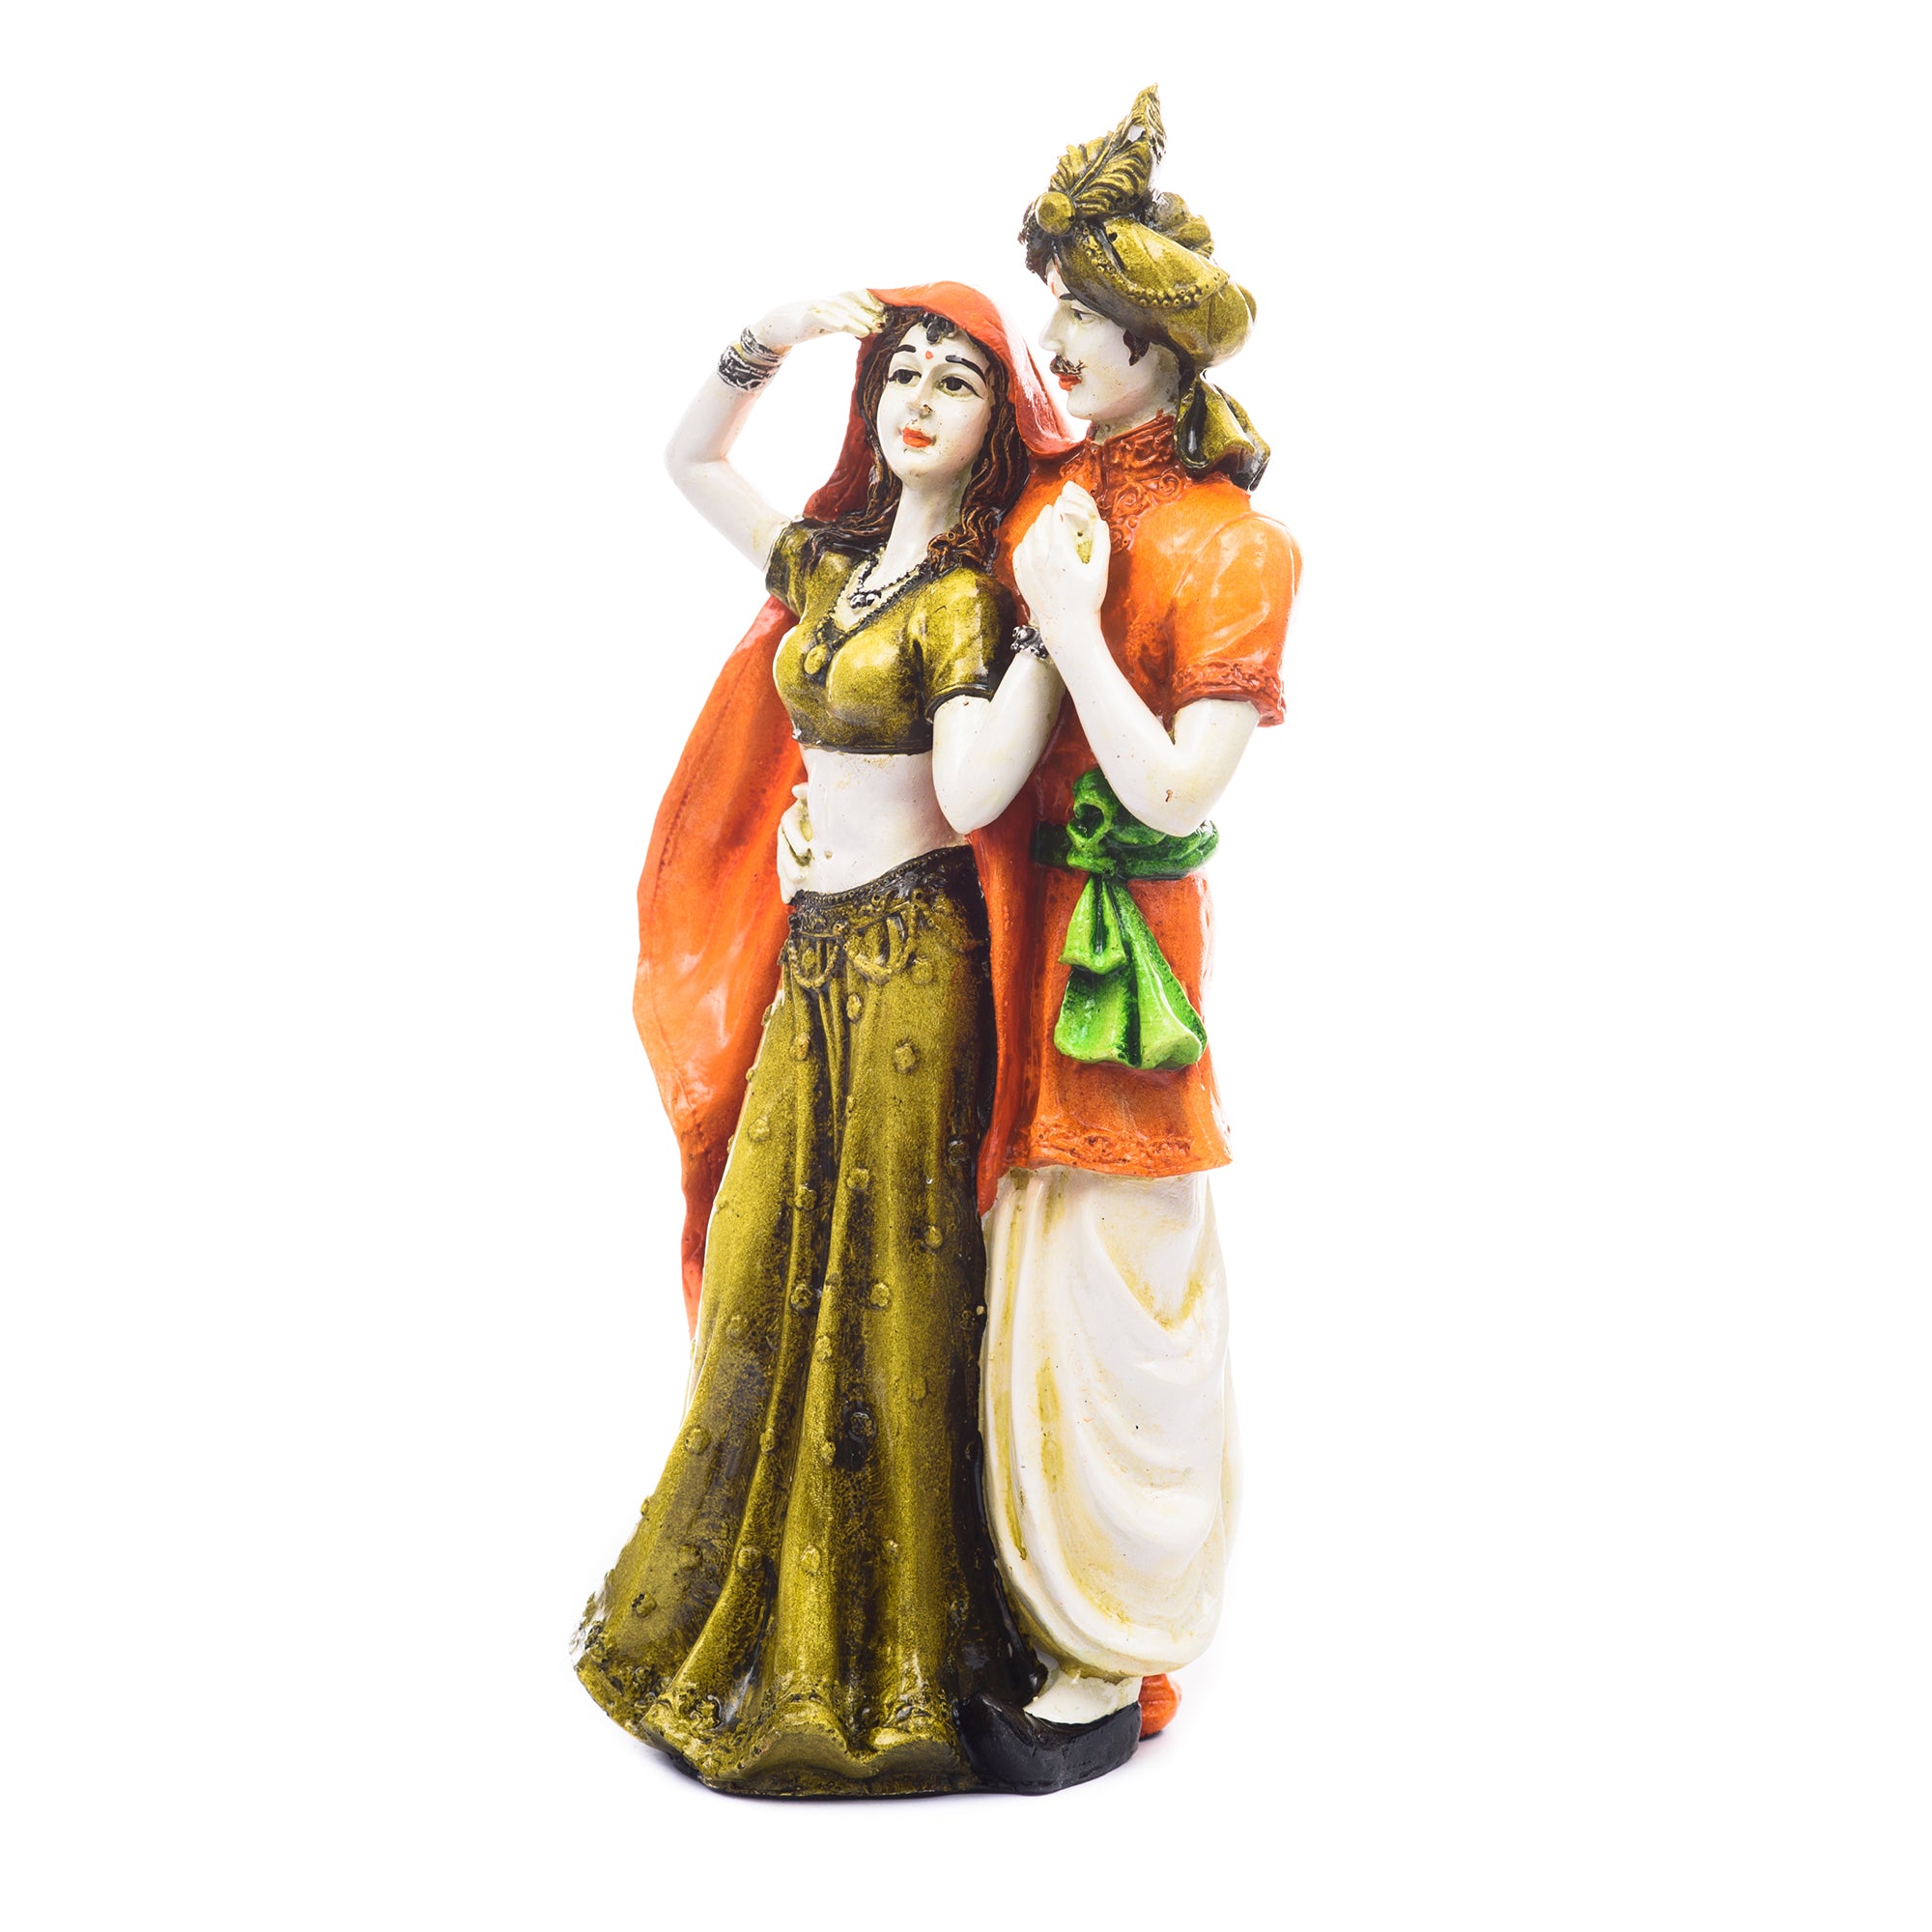 Polyresin Rajasthani Man And Women Statue Handcrafted Human Figurines Decorative Showpiece 2